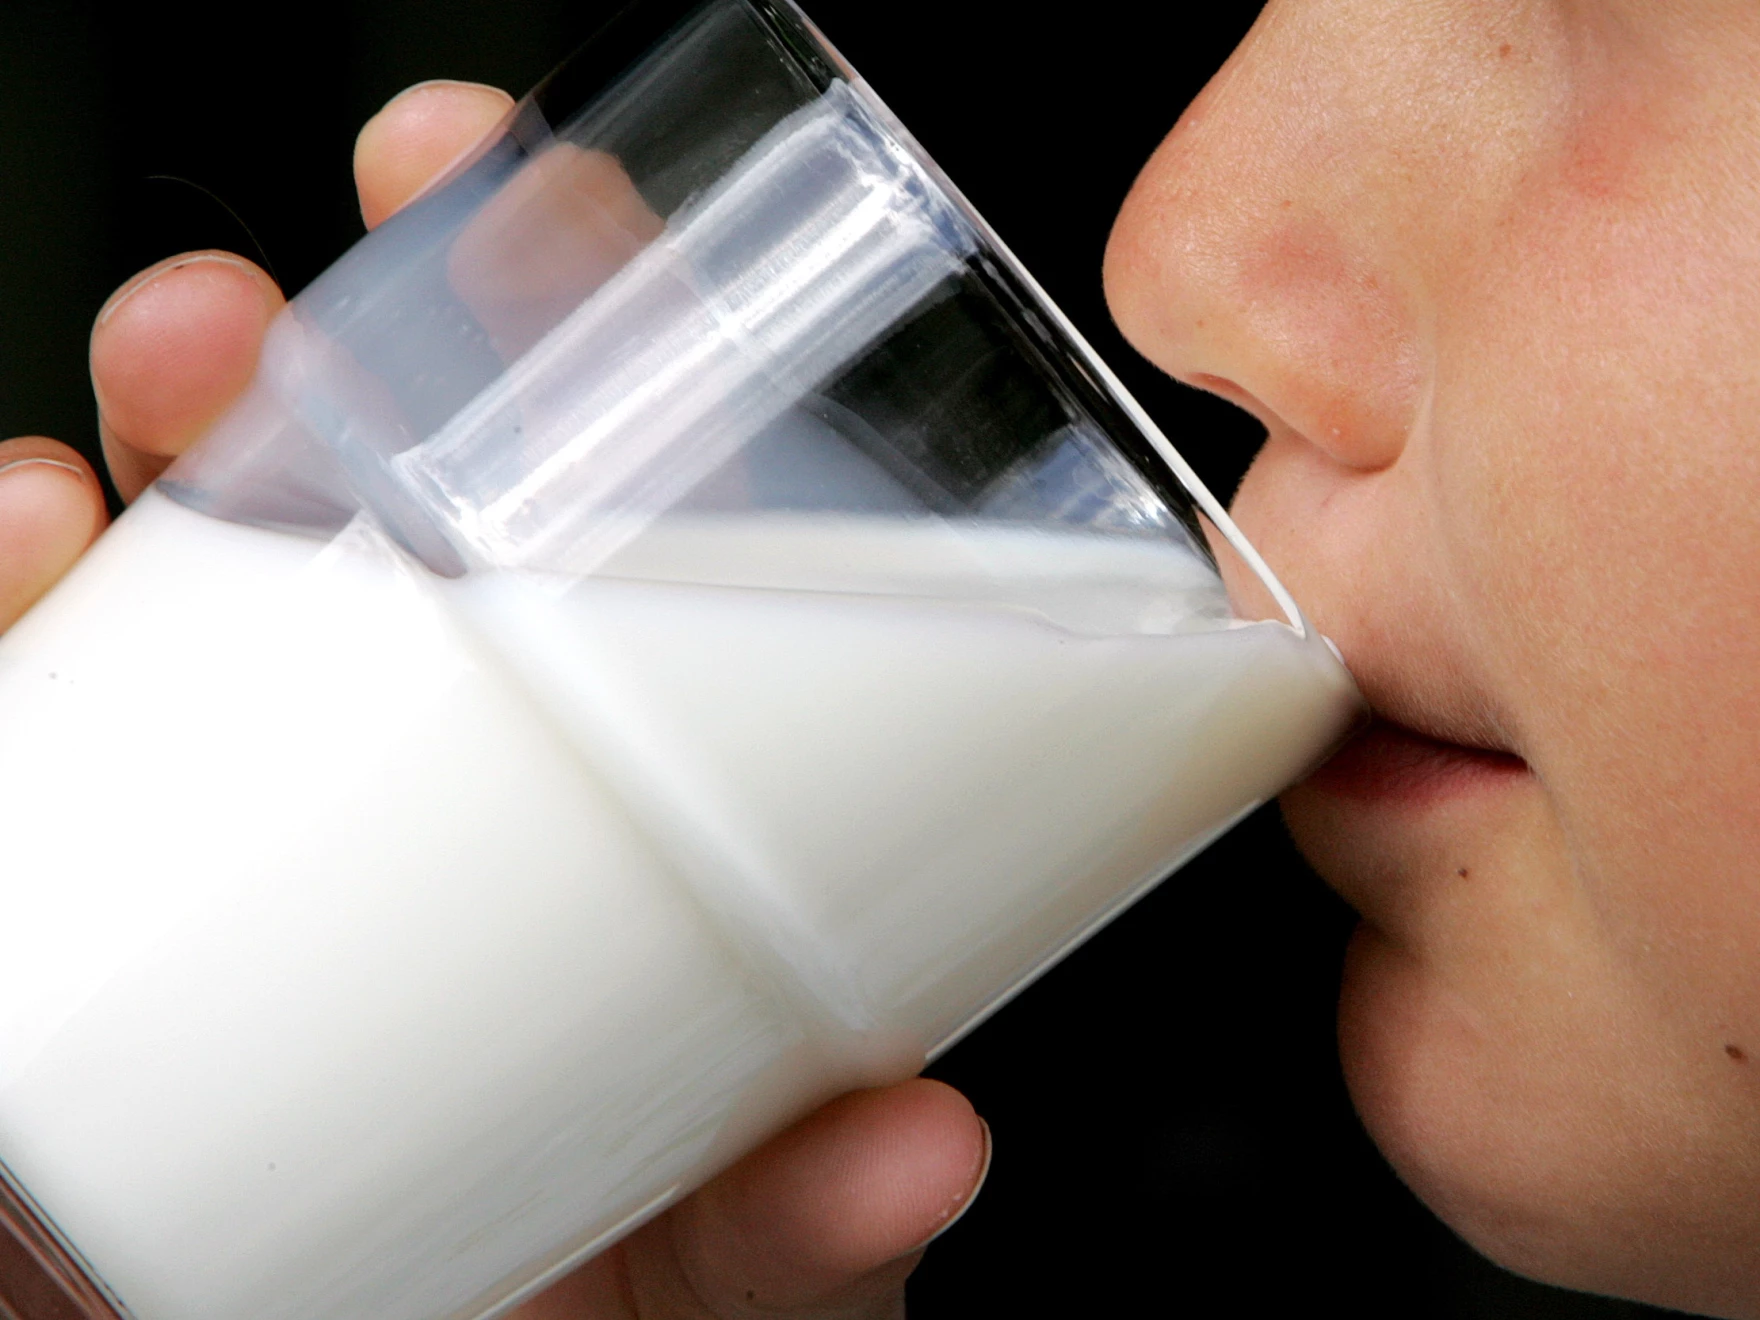 The U.S. Food and Drug Administration released draft guidance in February 2023 that would allow plant-based beverage manufacturers to continue using the word "milk."